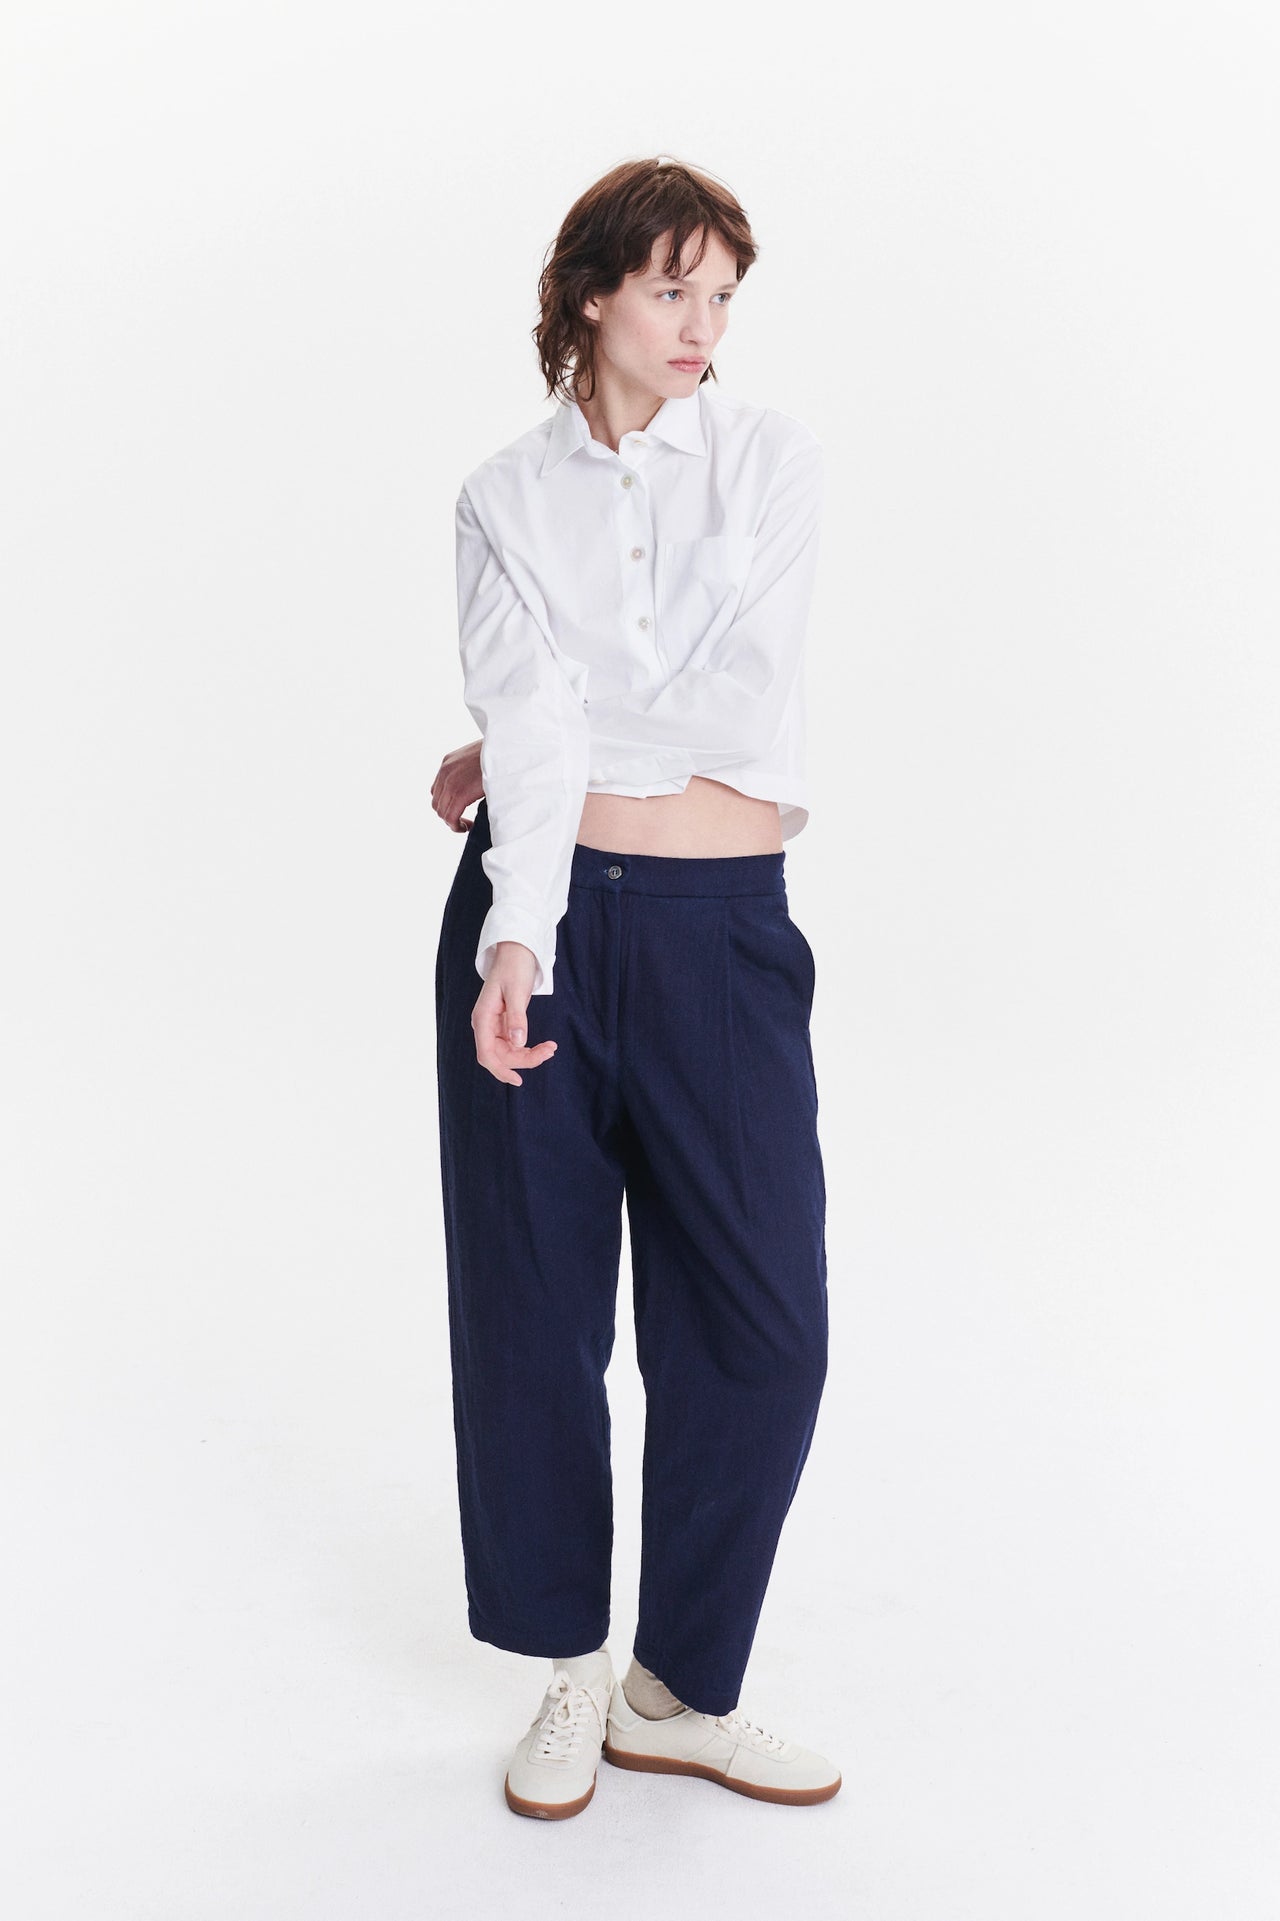 Relaxed Cropped Shirt in a Crisp White Italian Cotton, Nylon and Lycra